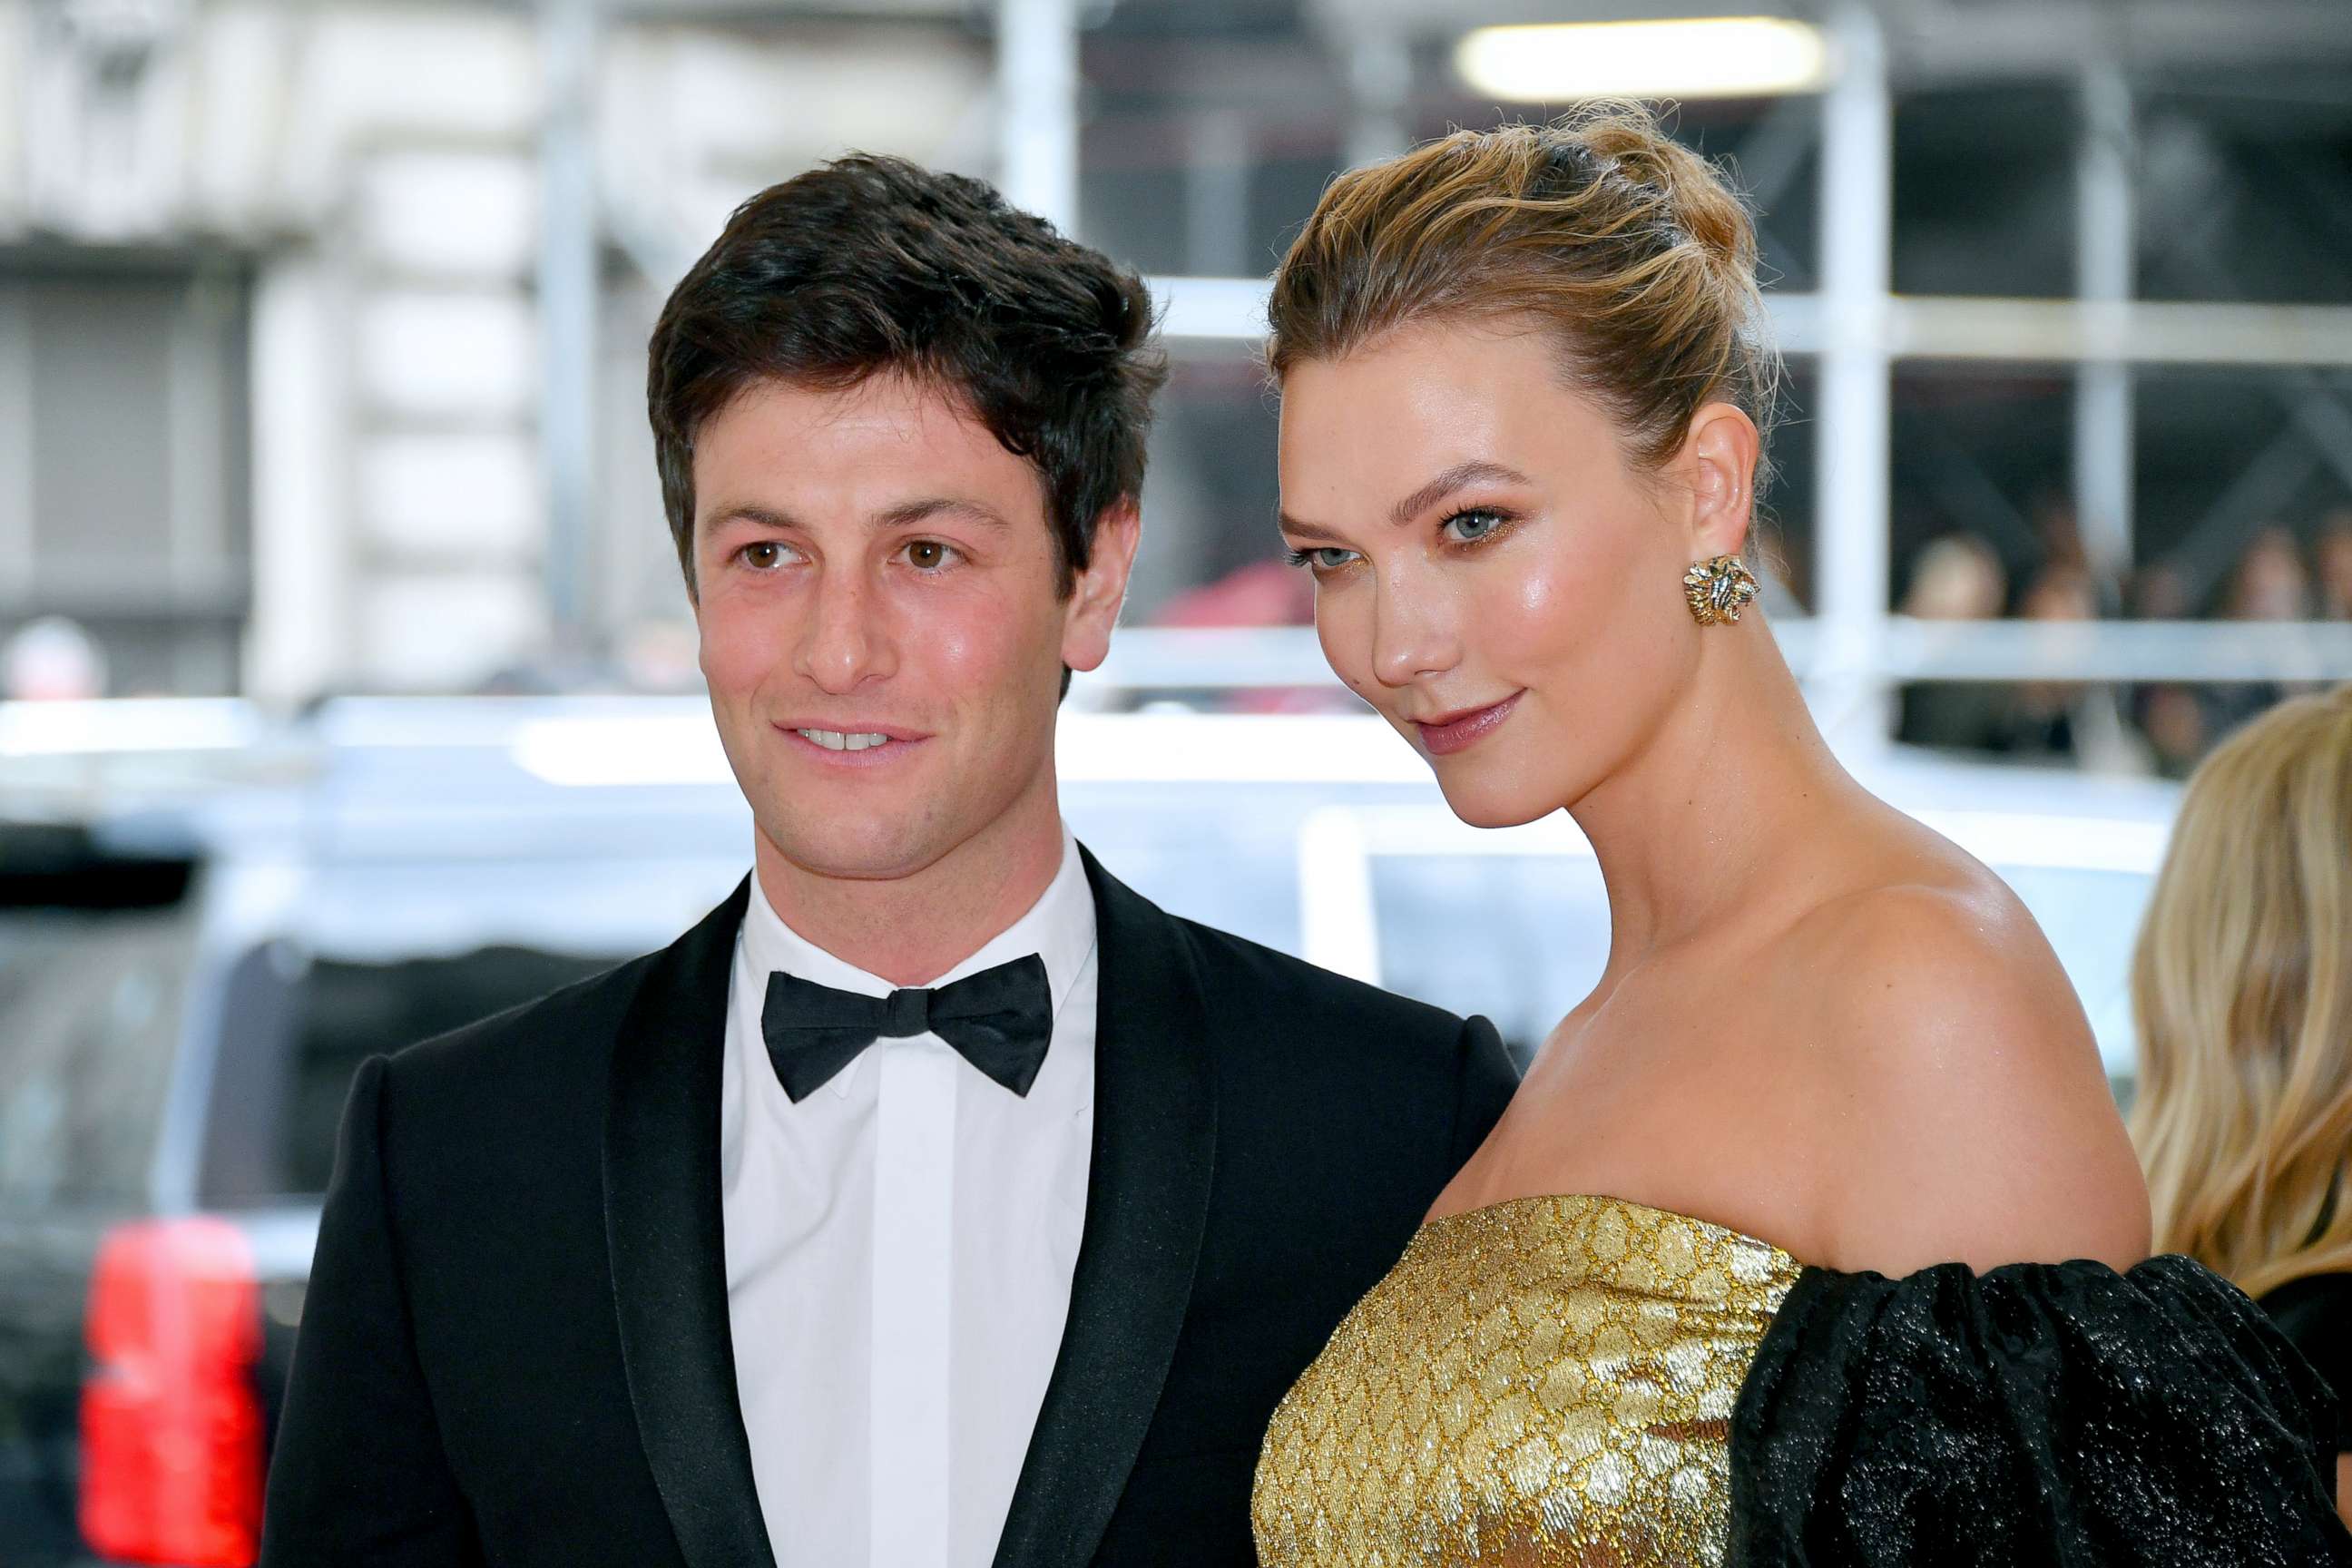 PHOTO: Joshua Kushner and Karlie Kloss attend the 2019 Met Gala Celebrating Camp: Notes on Fashion at Metropolitan Museum of Art, May 6, 2019, in New York City.